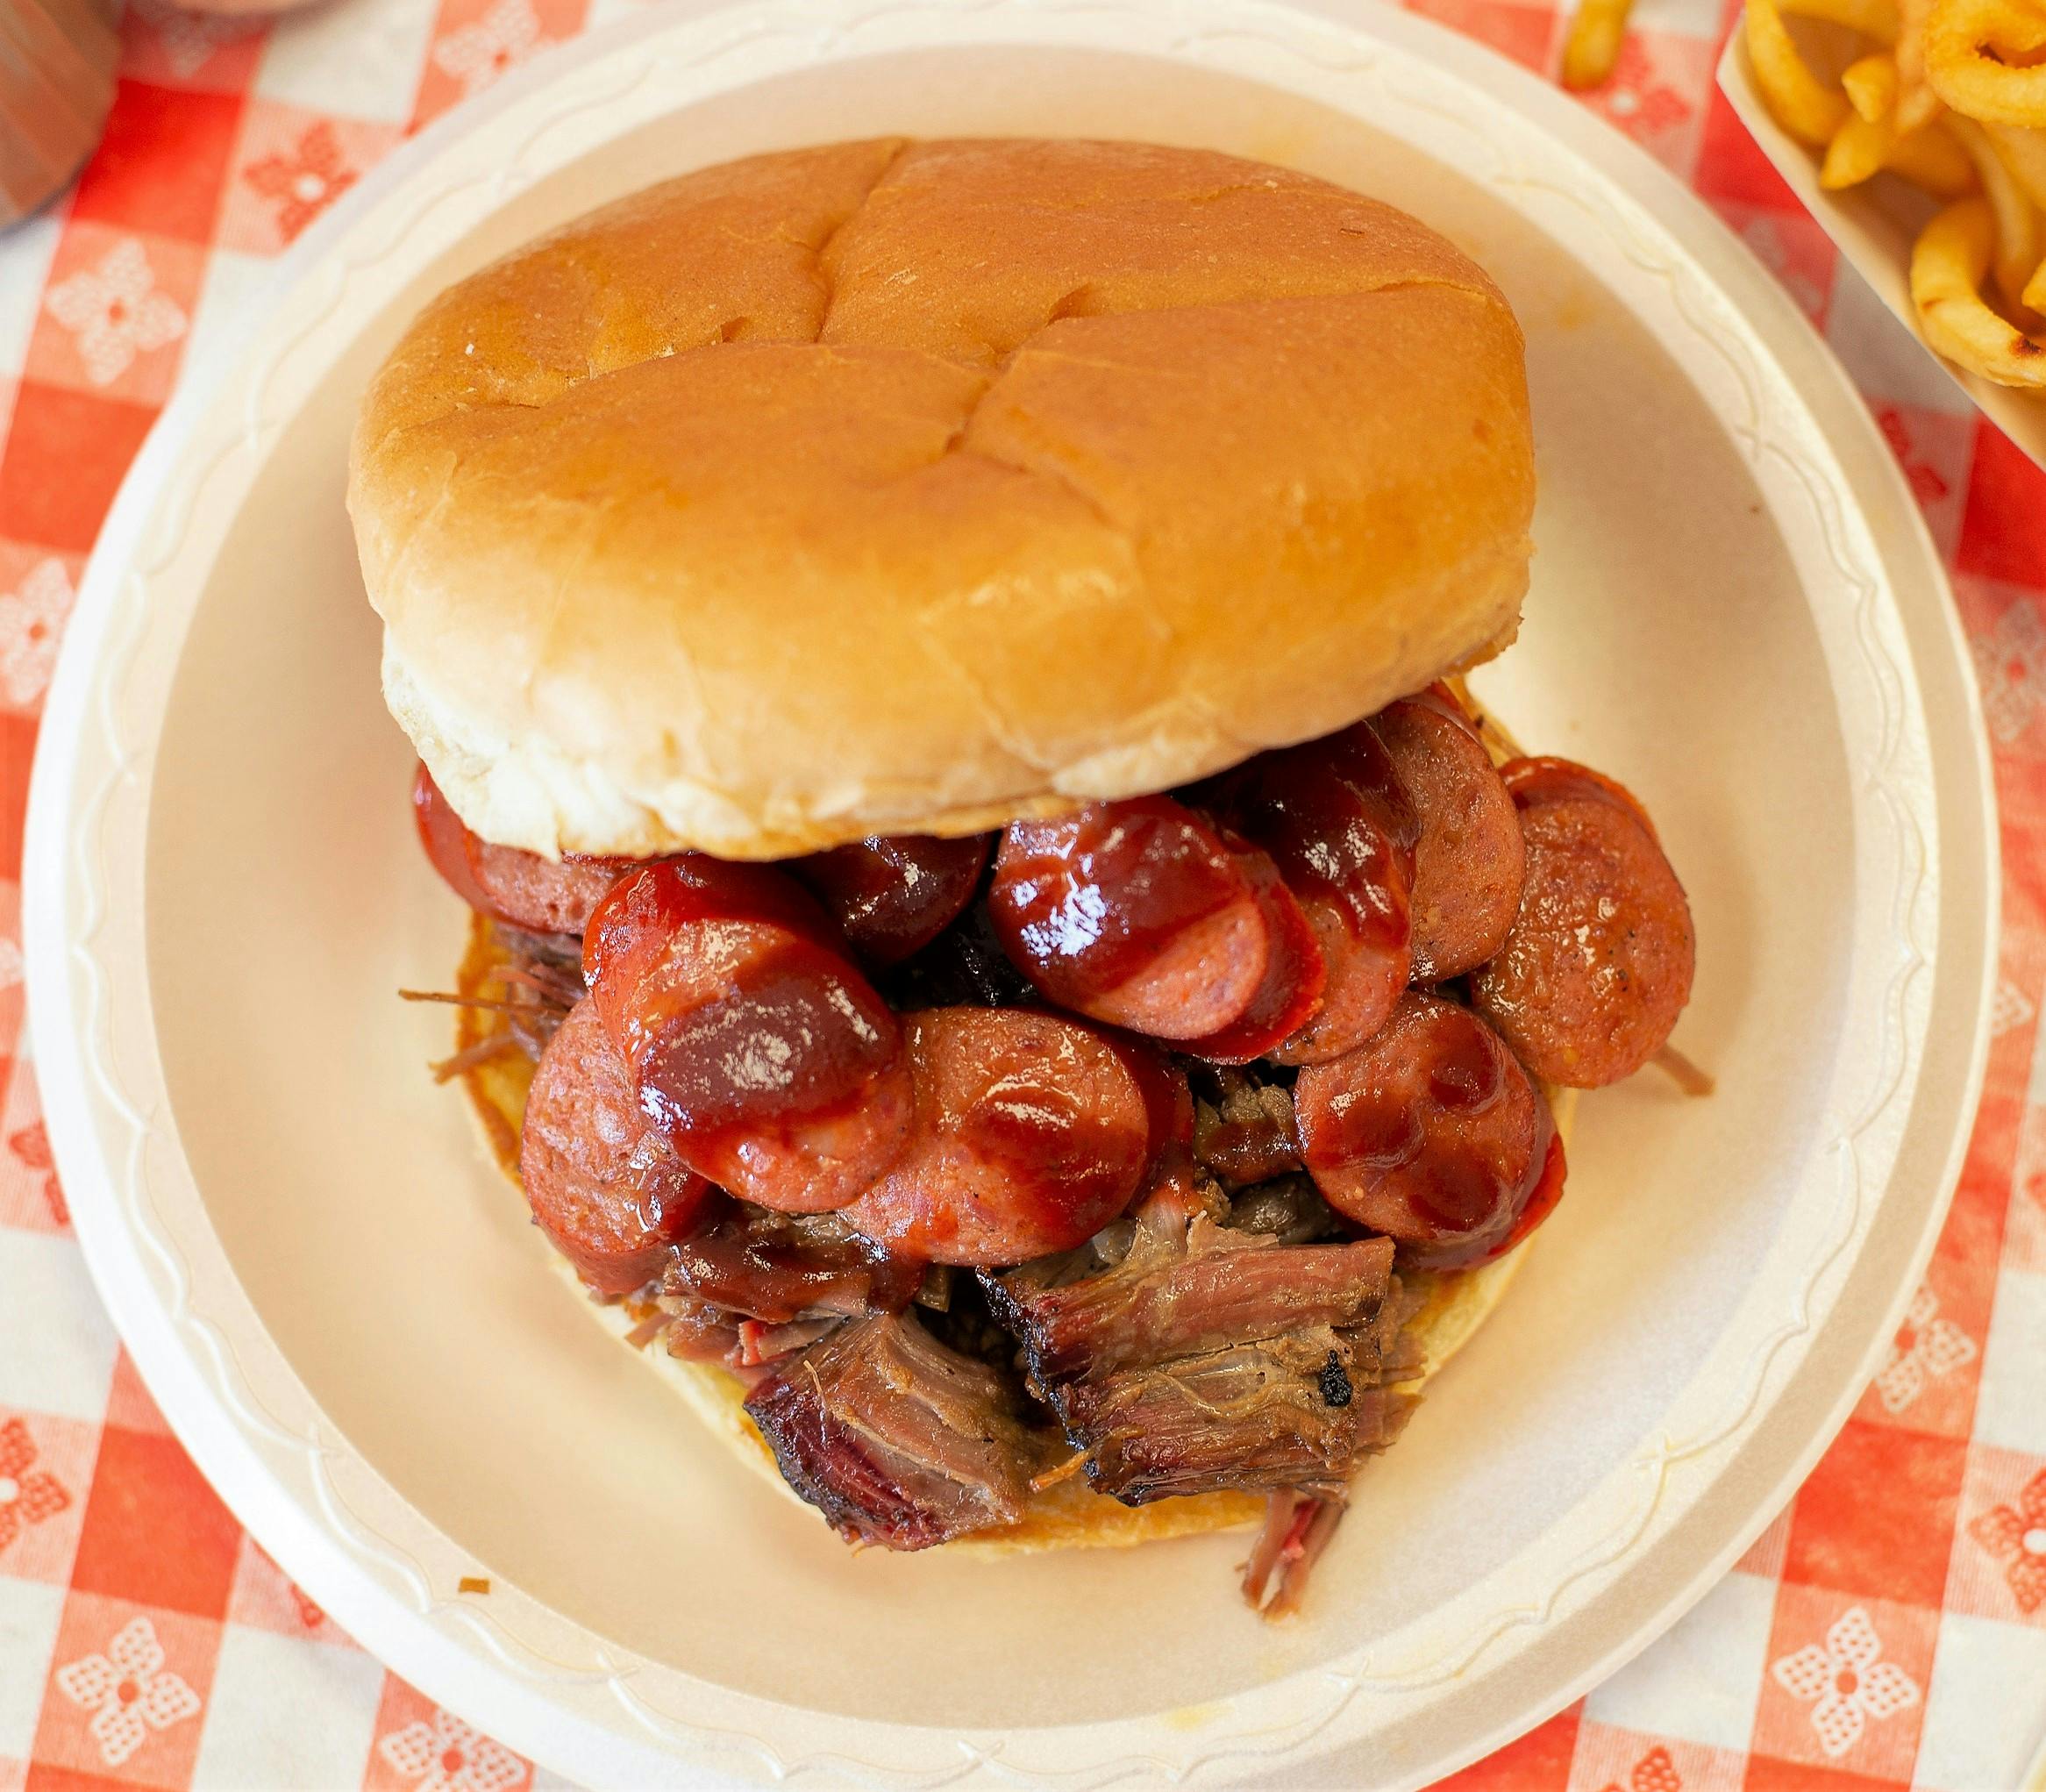 Smoke Stack Sandwich from Hog Wild Pit BBQ & Catering in Lawrence, KS